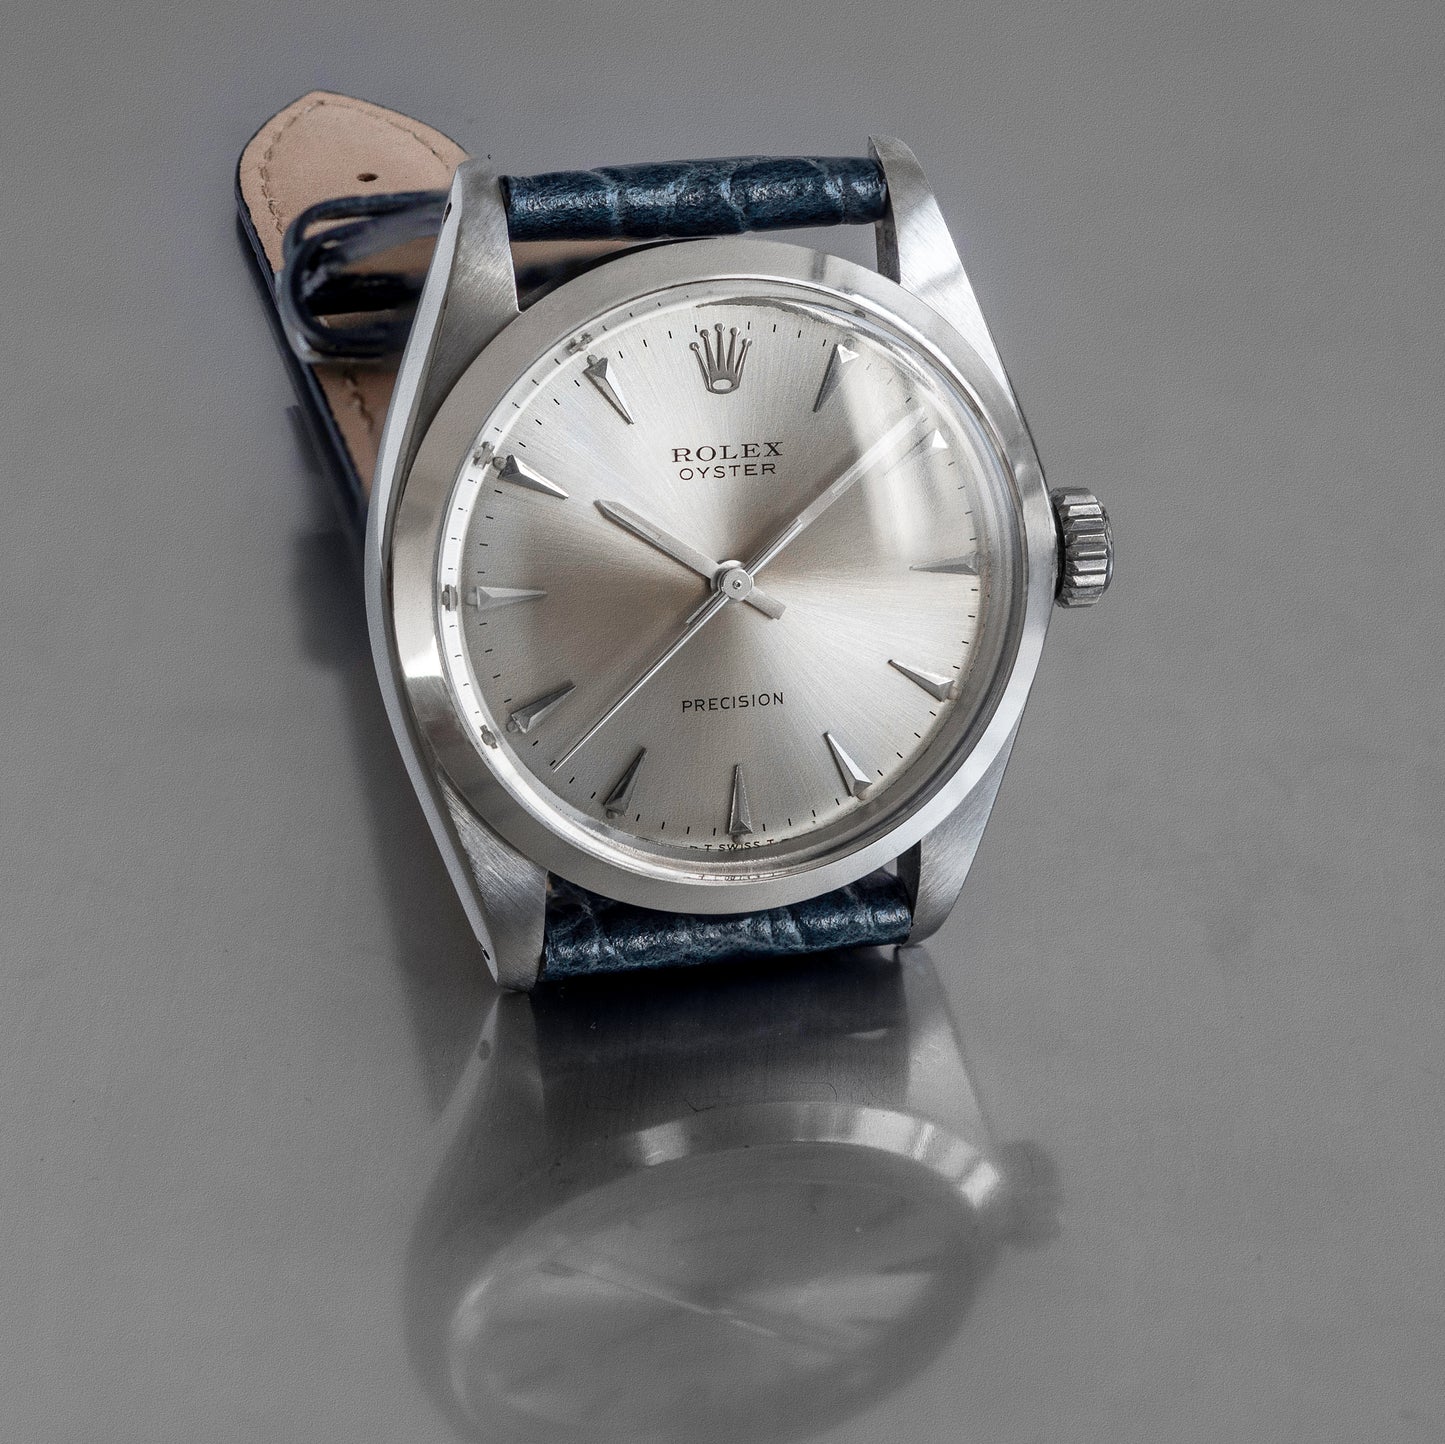 No. 575 / Rolex Oyster Precision with Box & Paper - 1966